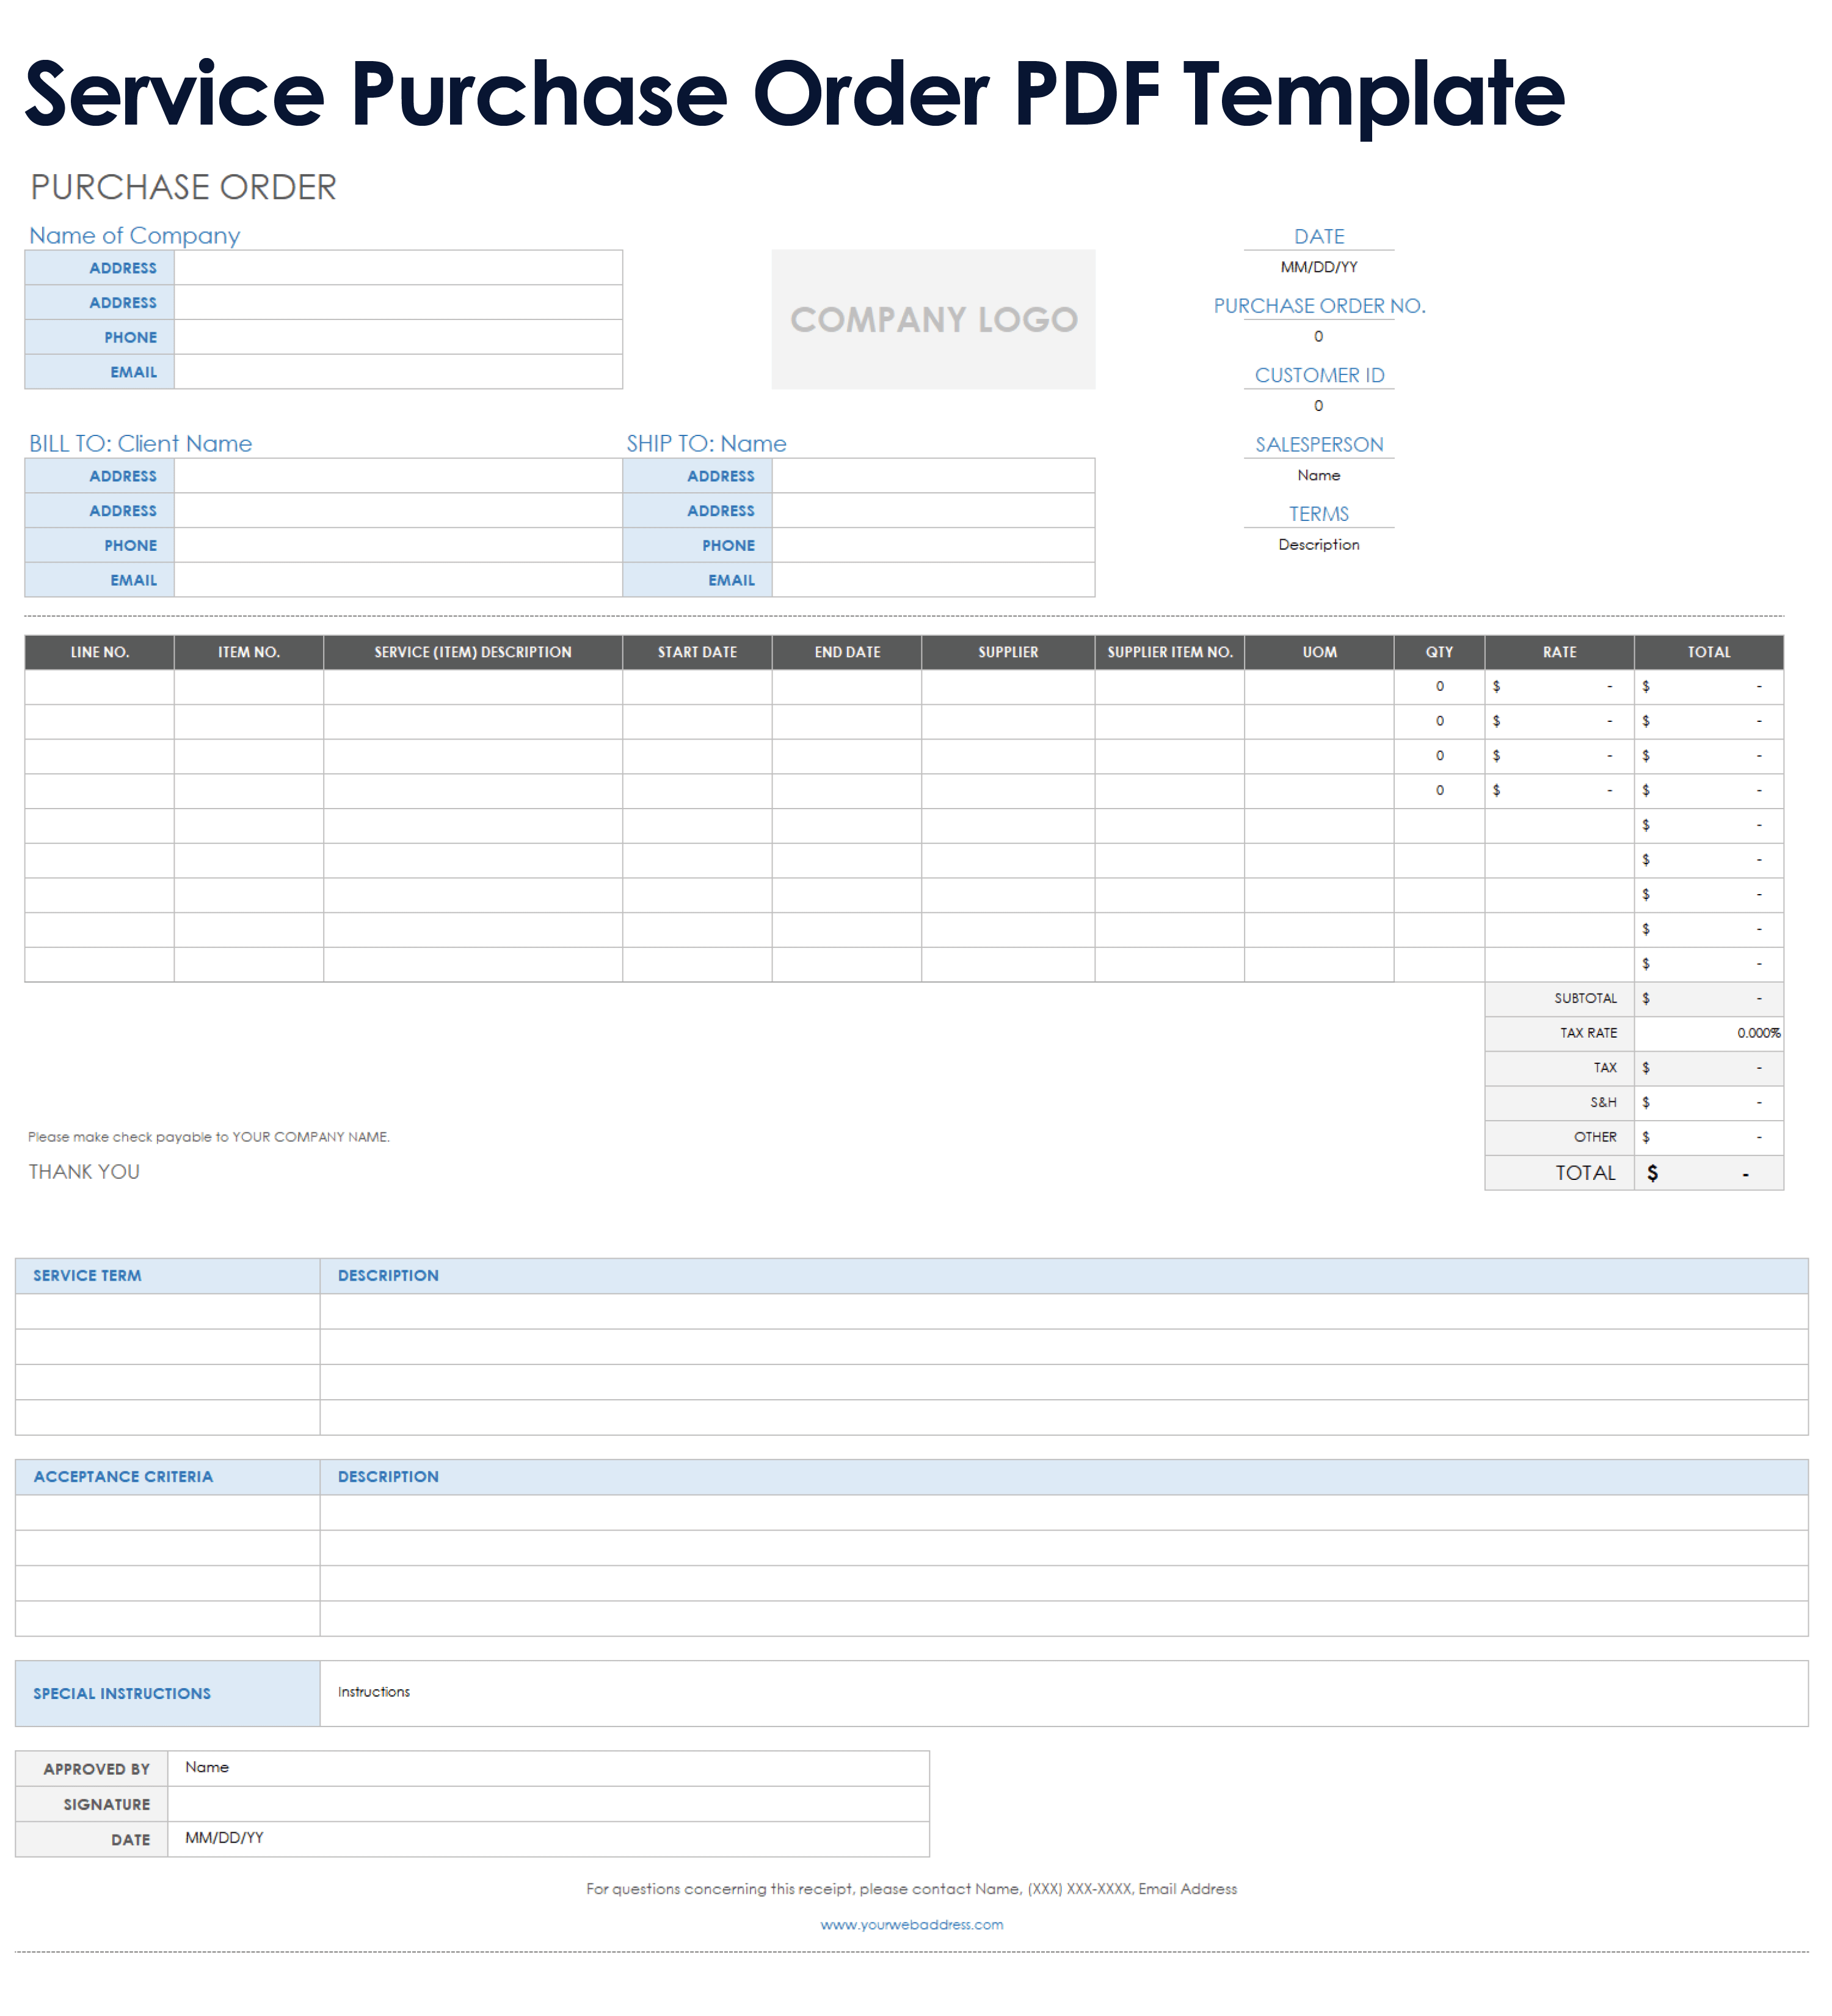 Service Purchase Order Template